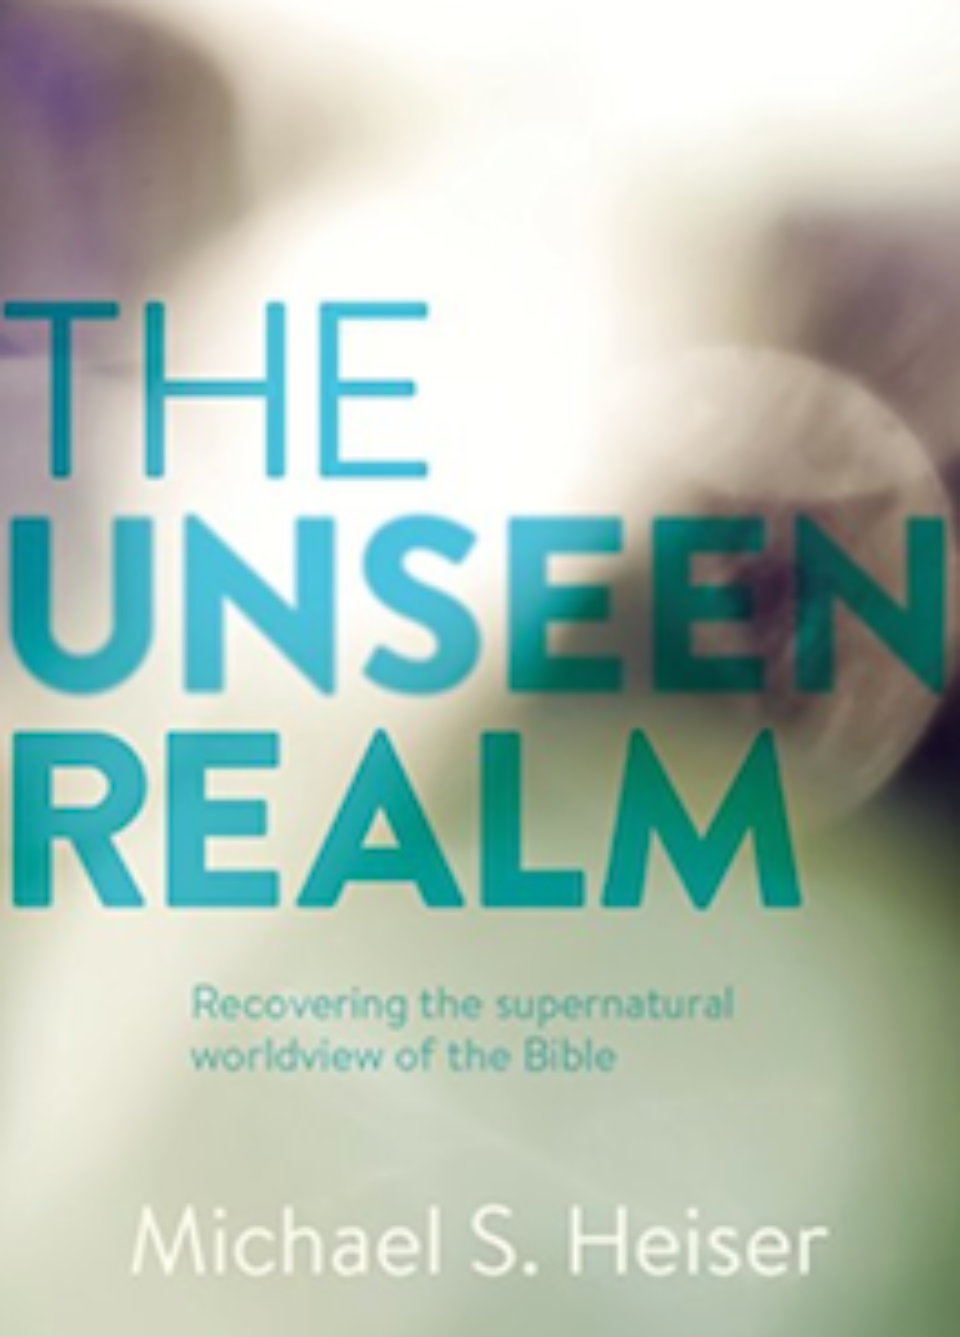 Congrats to Suzanne Sellner who won Michael Heiser's The Unseen Realm.